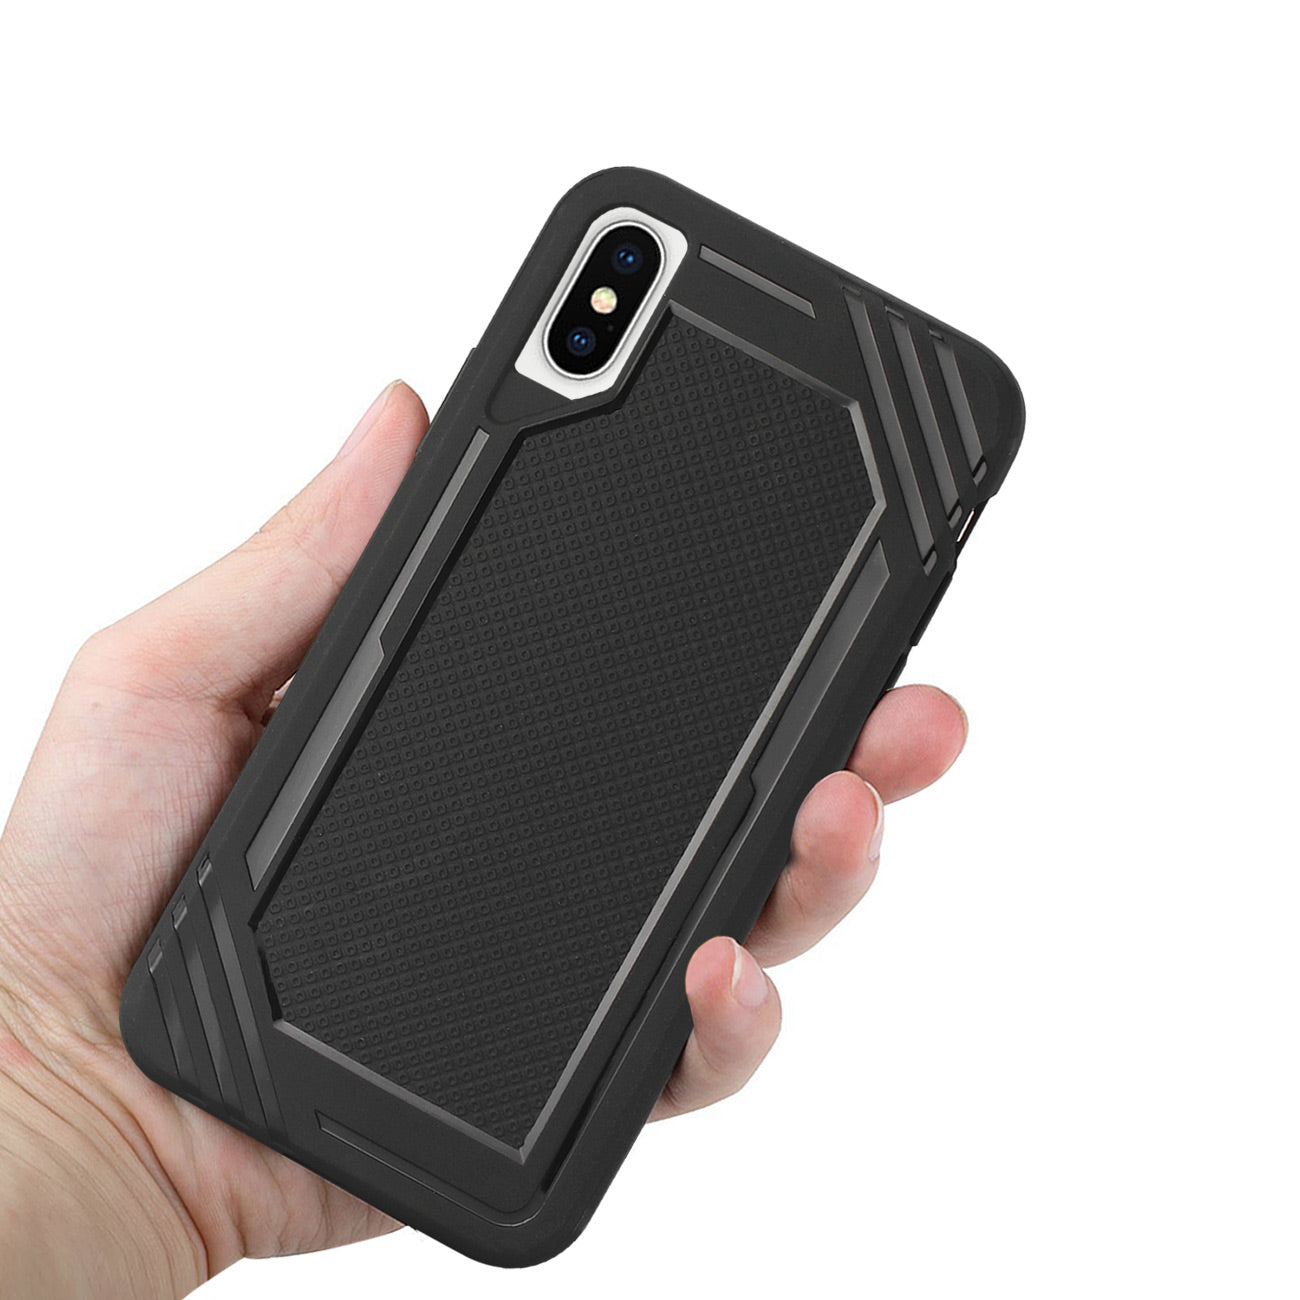 iPhone X Slim-Fit Flexible Soft TPU Strong Rubber Bumper Anti-Slip Grip Protective Armor in Black